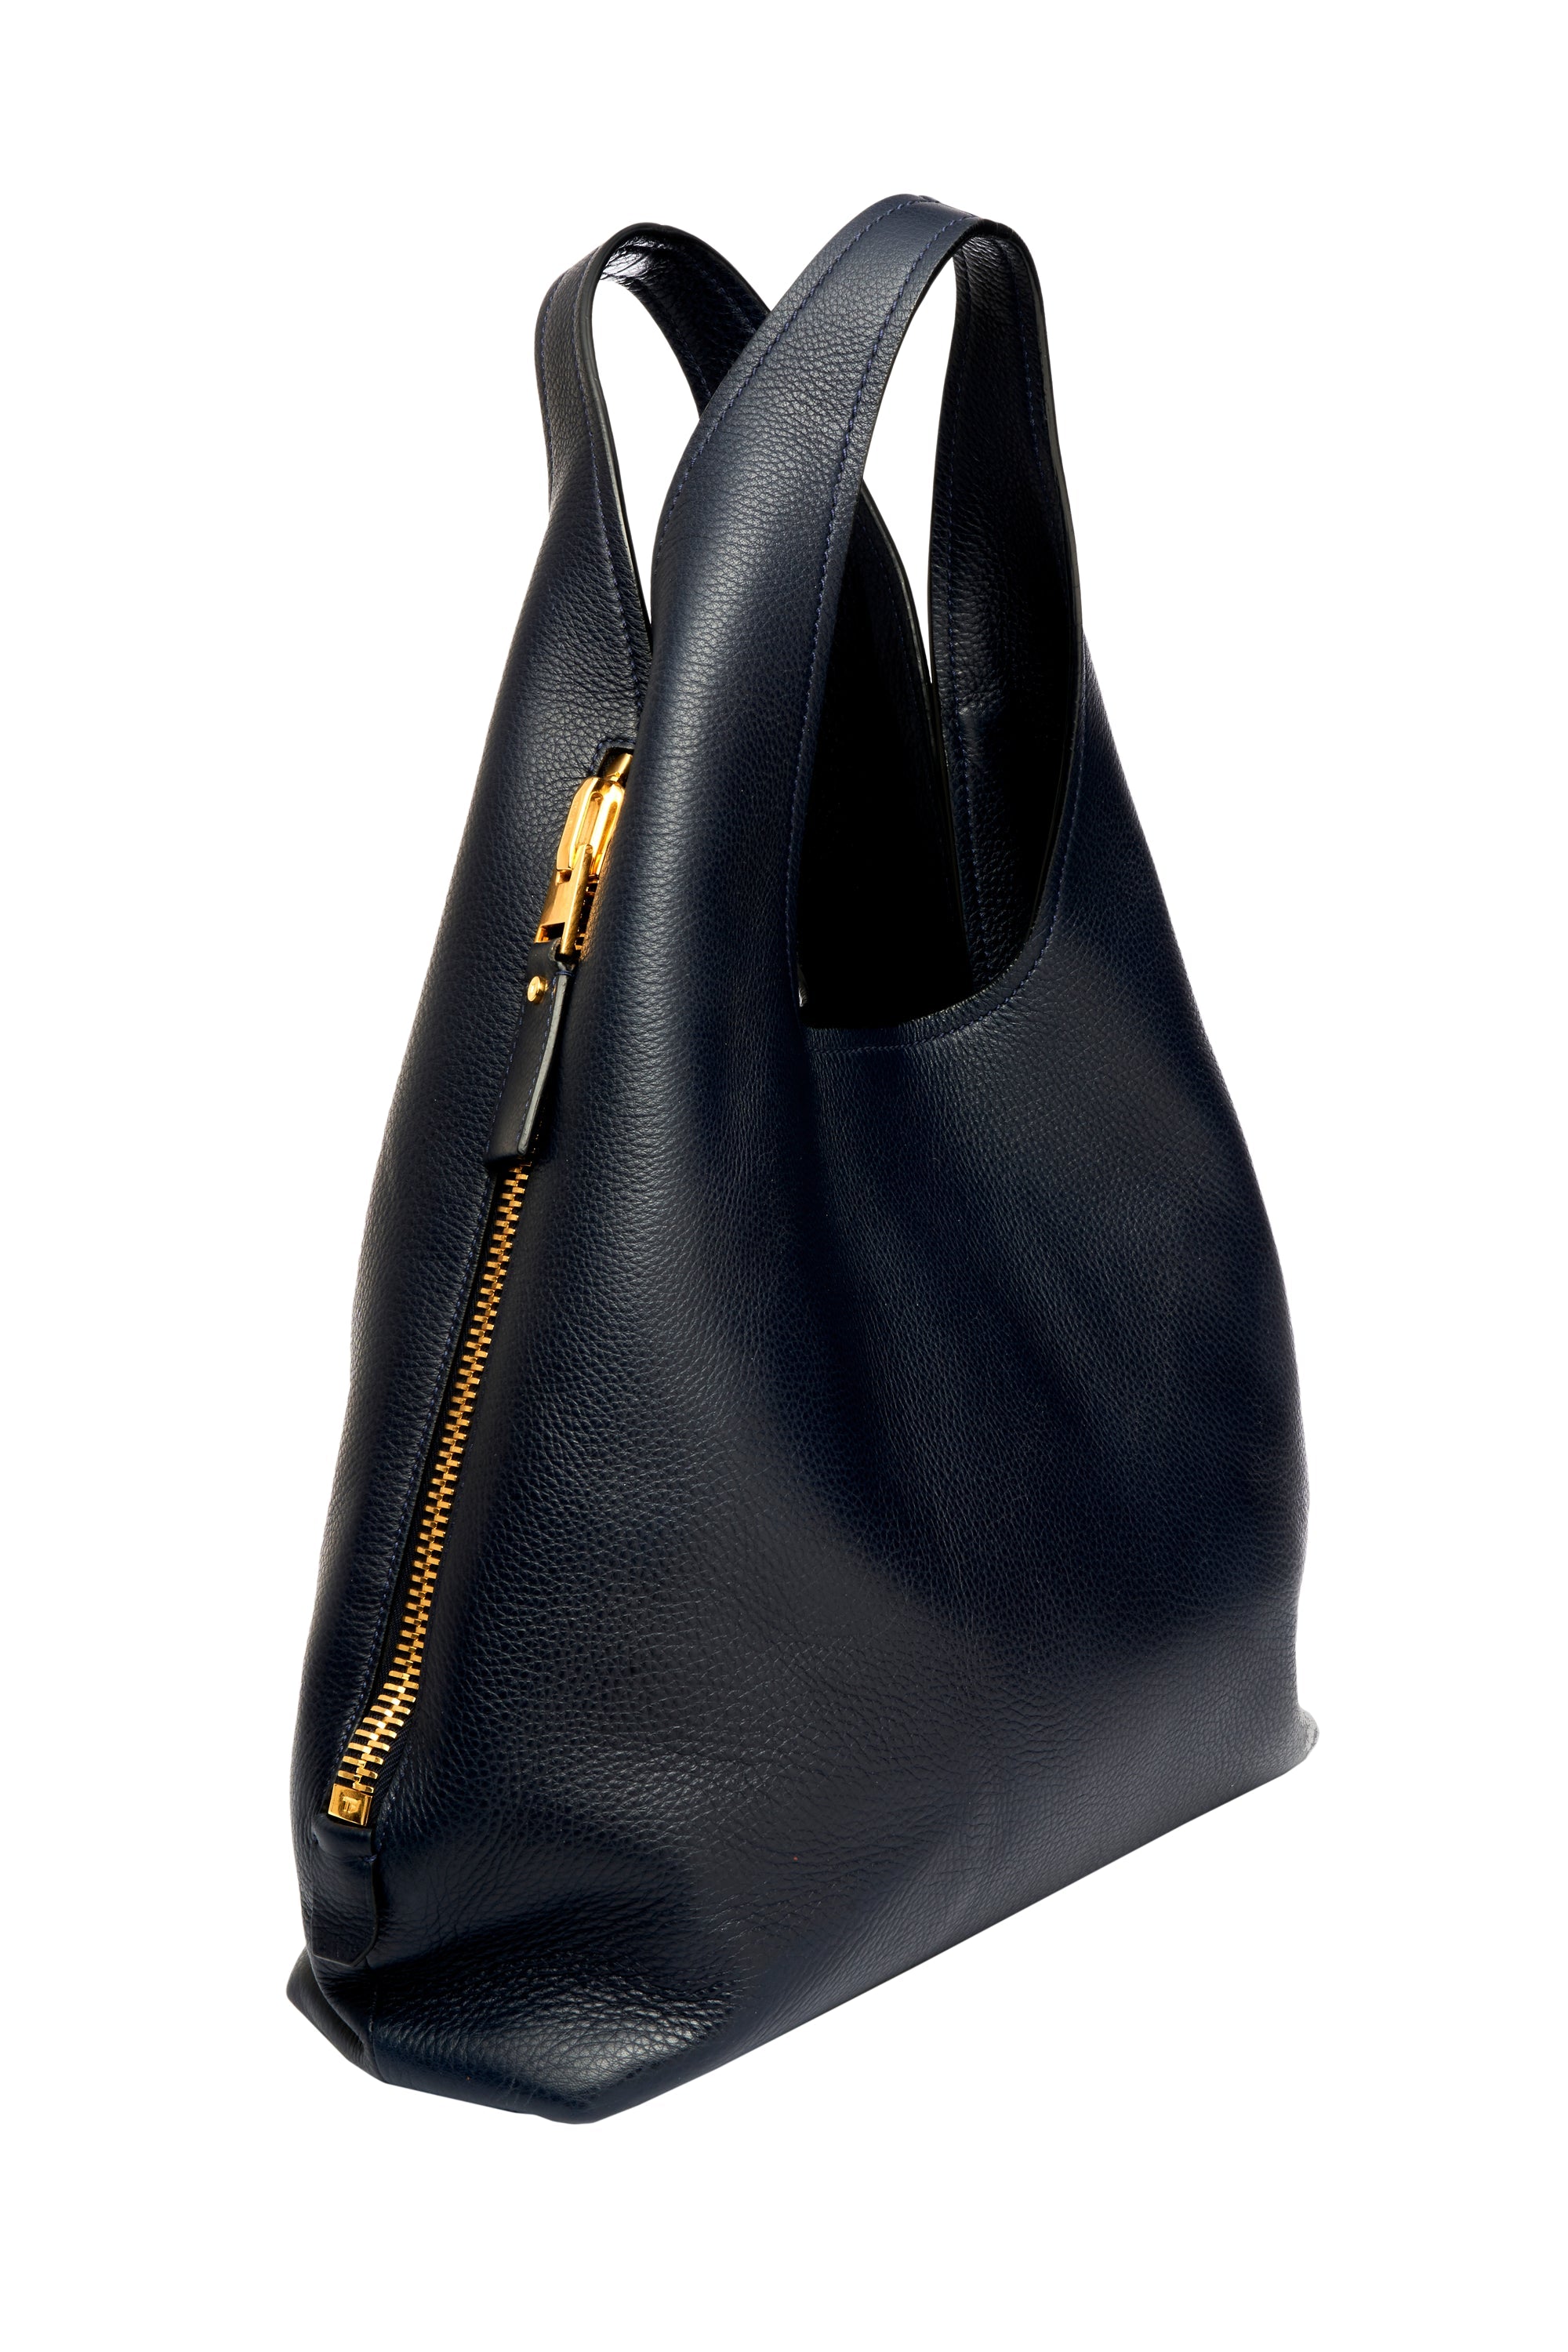 Tom Ford Navy and Gold Zipper Tote